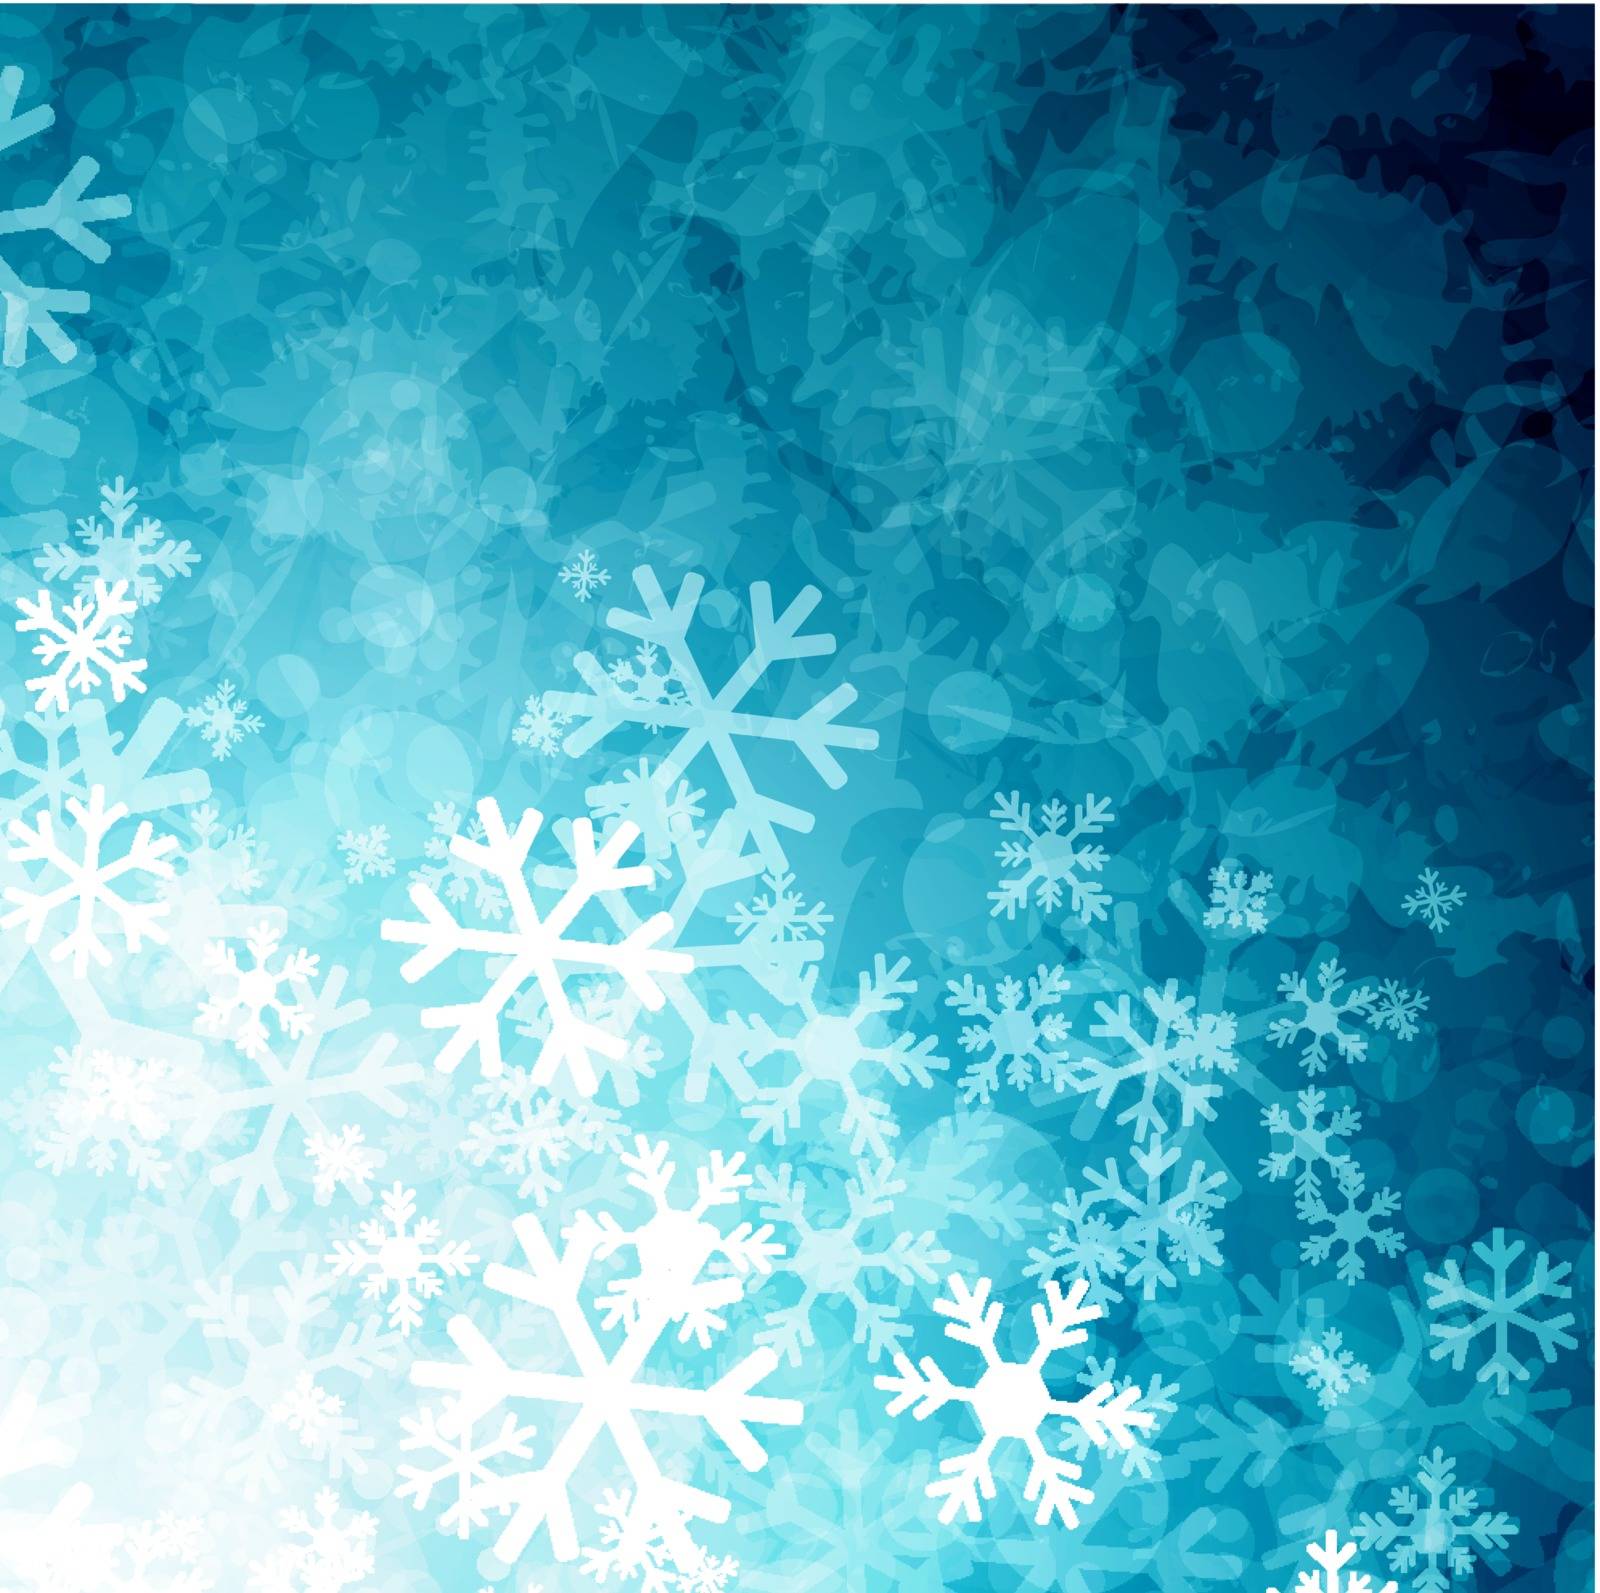 Winter Abstract Snowflake Background in Blue, Copyspace